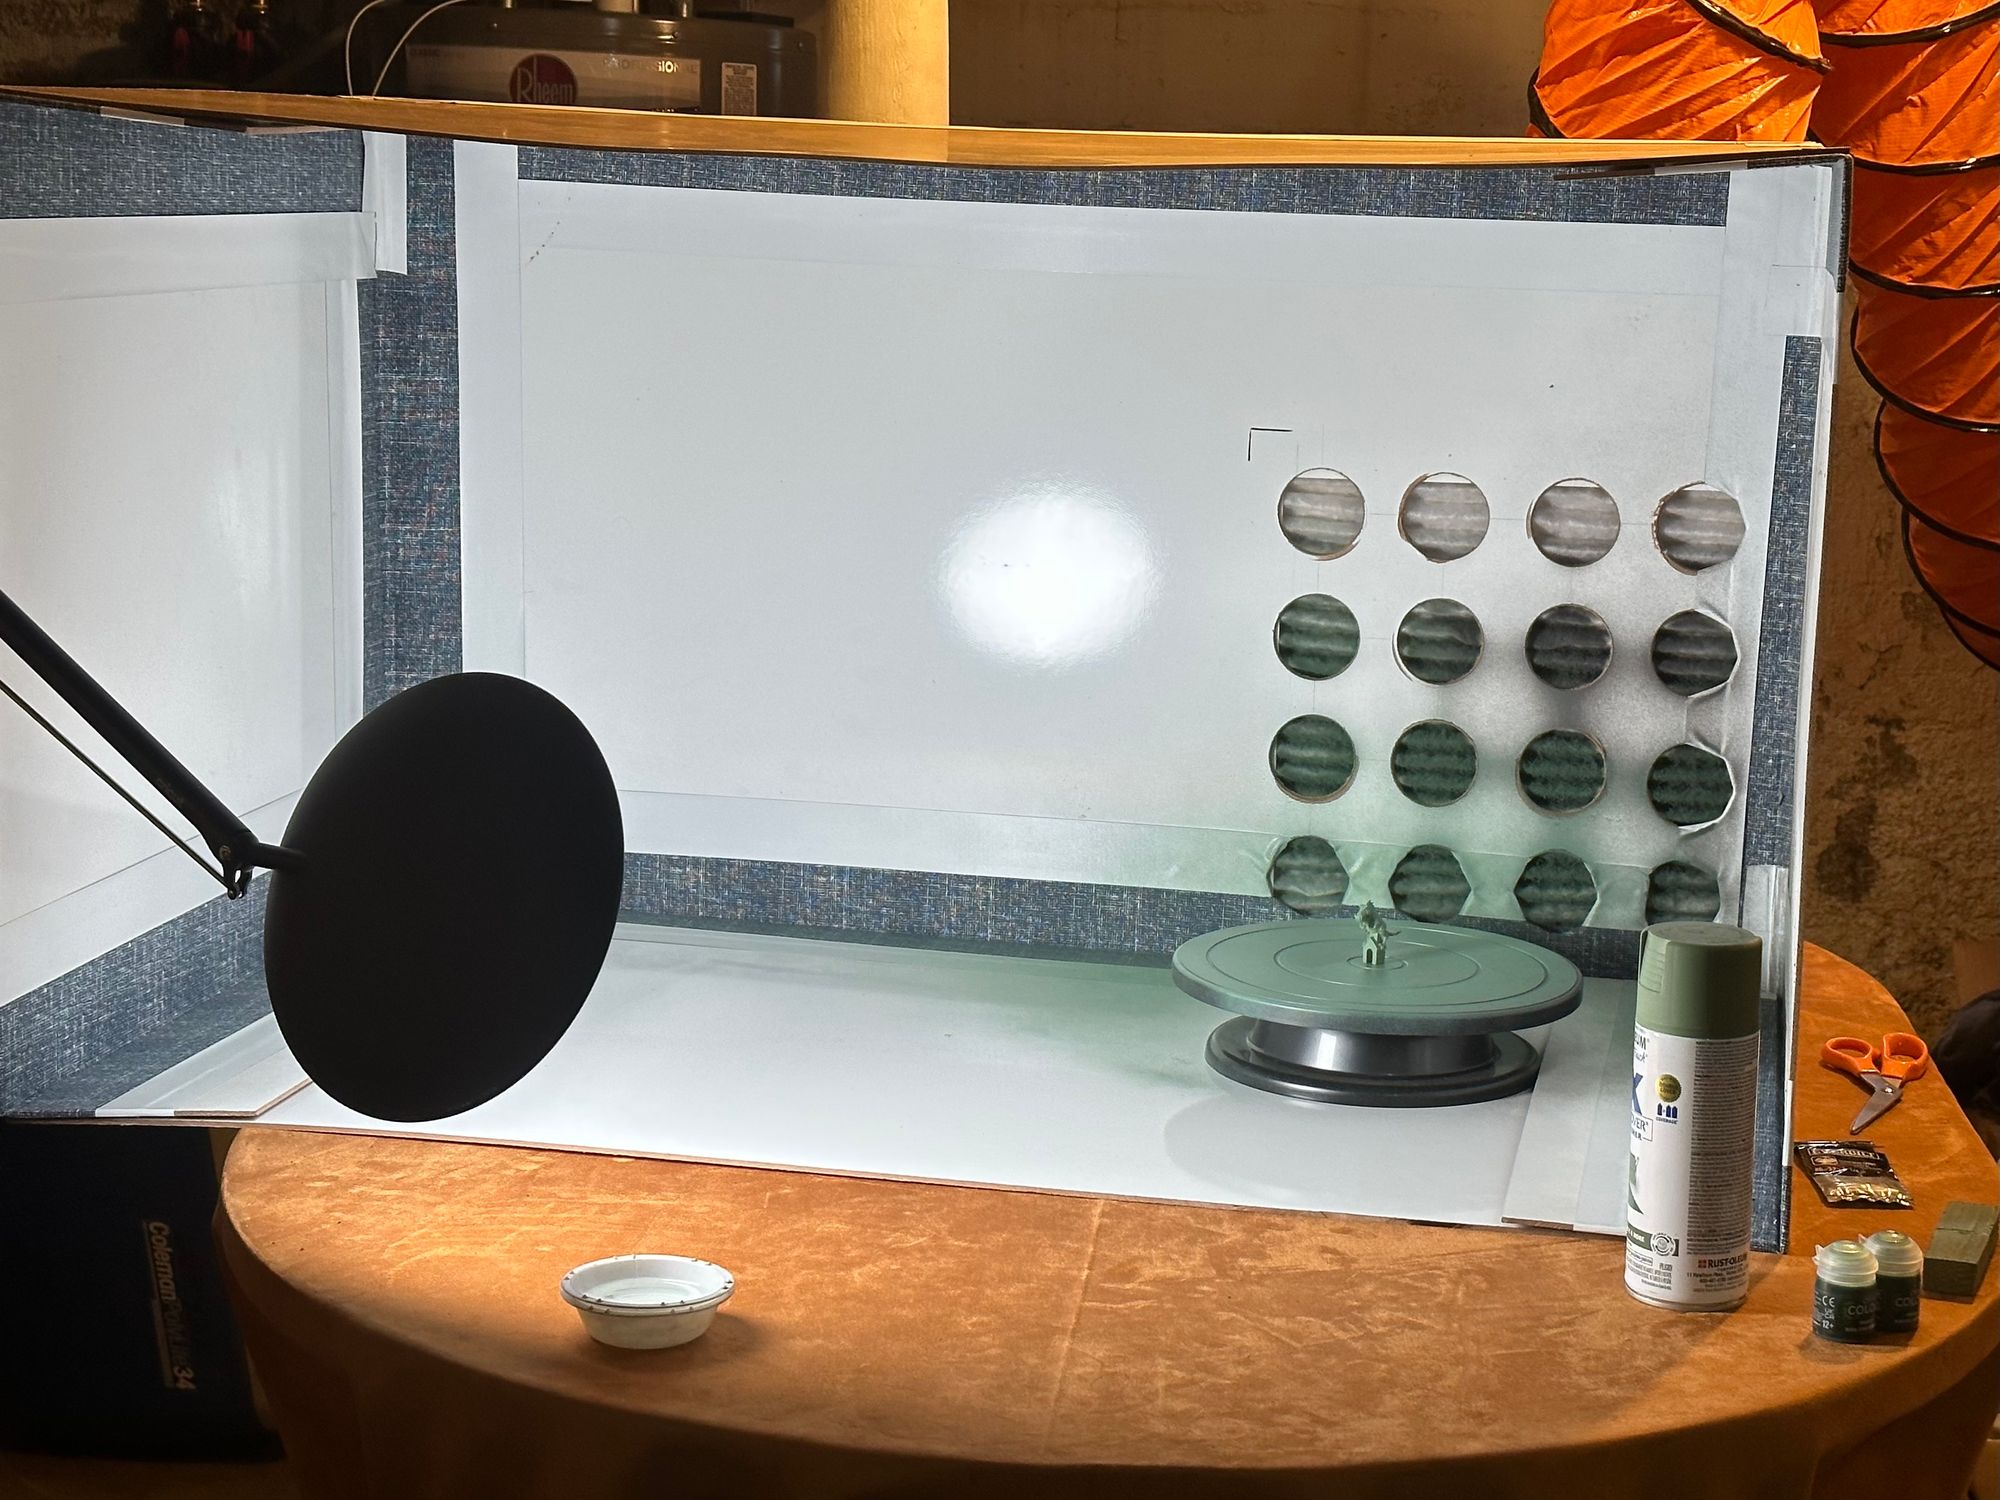 The paint booth, set up on its side, after painting a small piece. Inside the booth is a painting turntable and the piece, and paint supplies sit nearby, illuminated by a lamp.